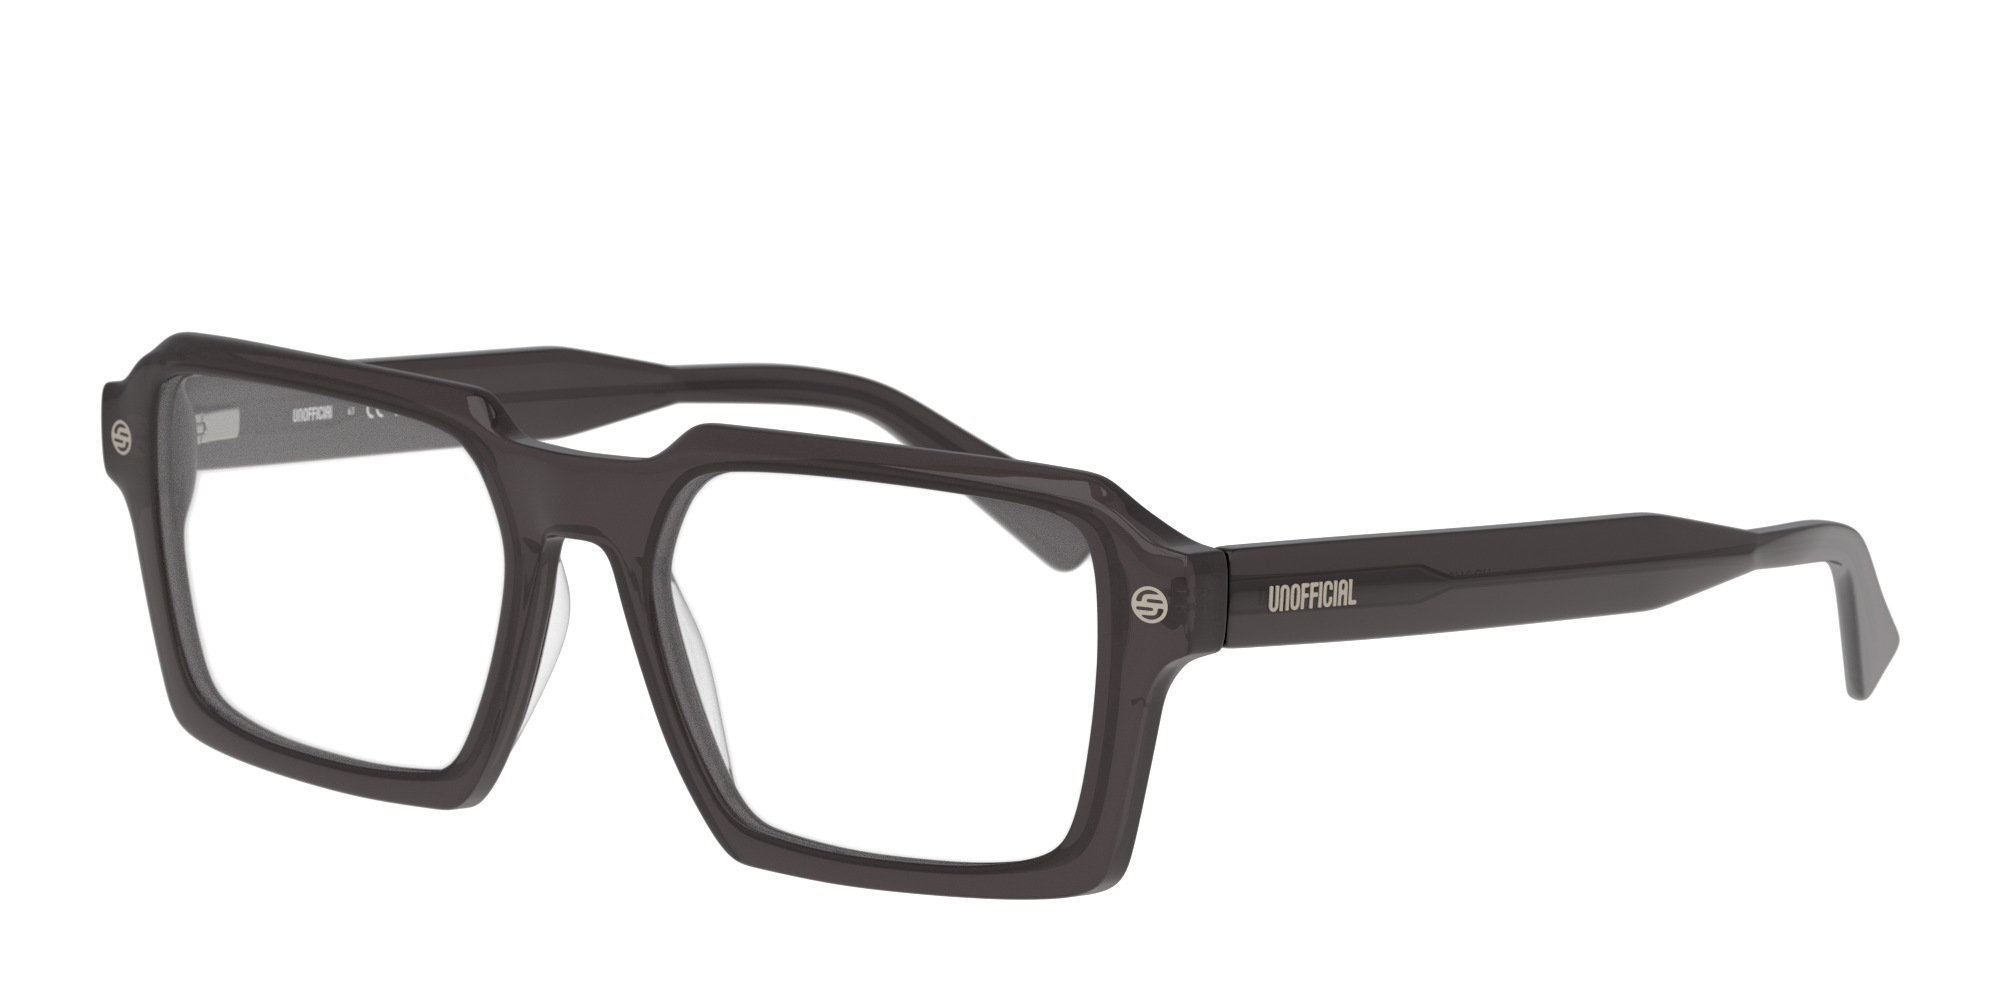 Angle_Left01 Unofficial UO2160 Glasses Transparent / Grey